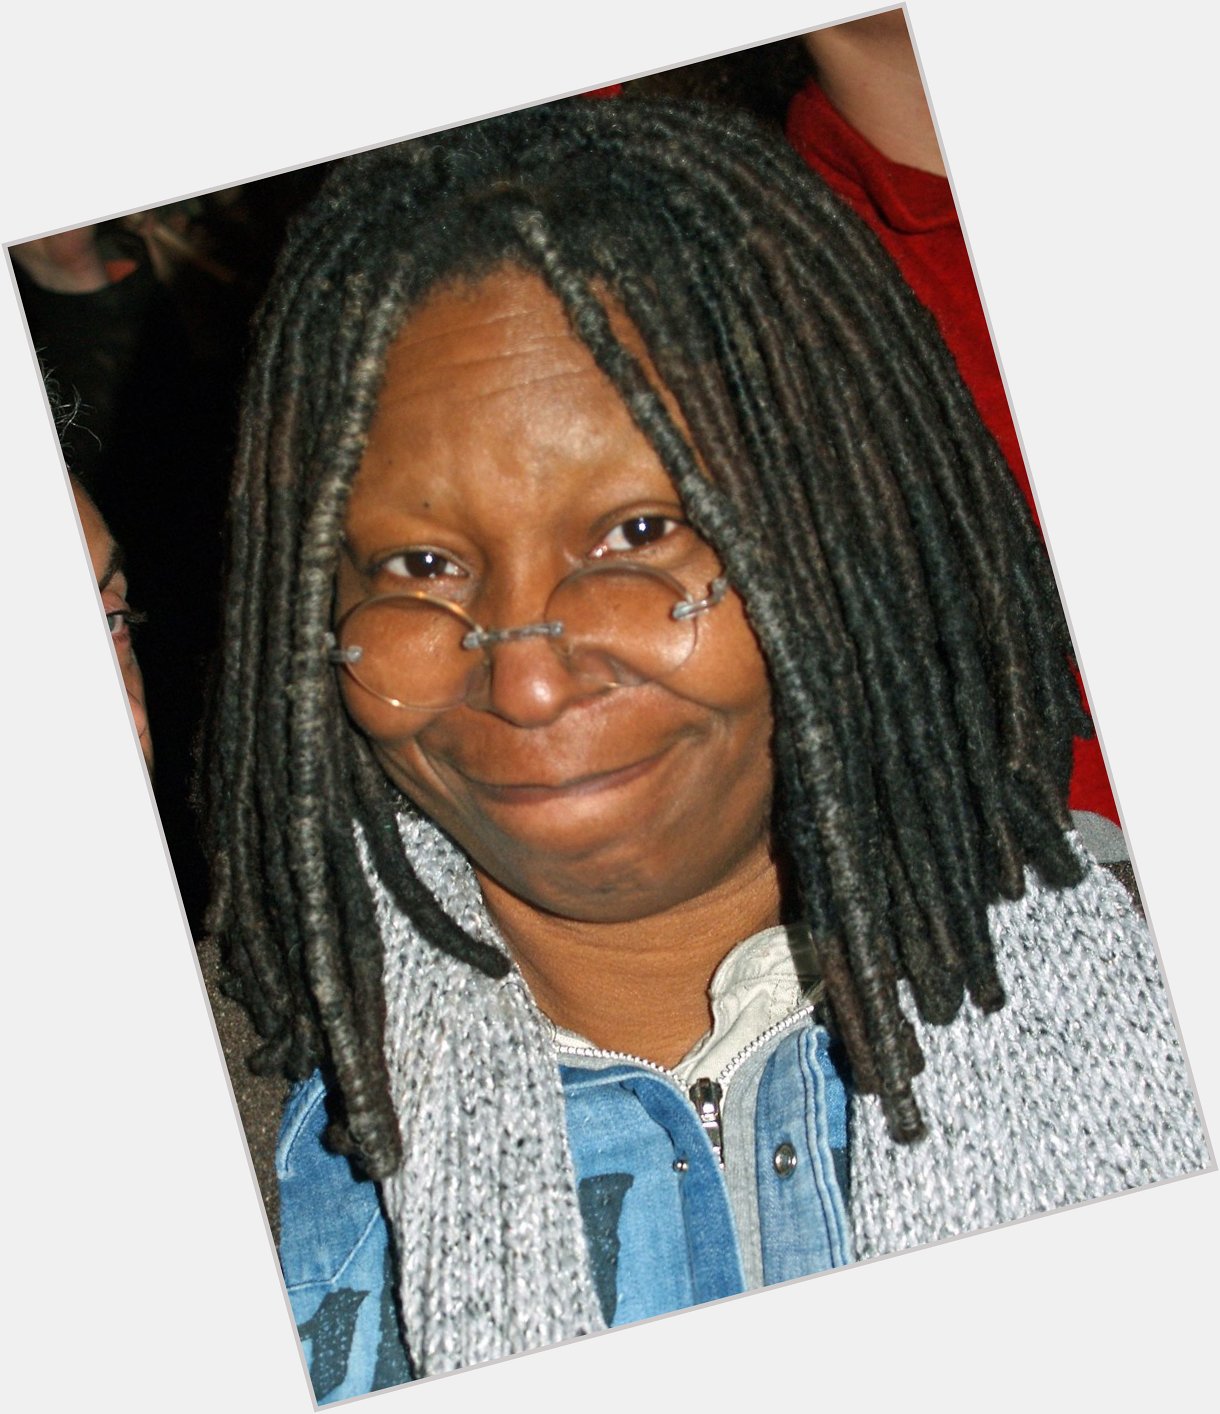 And an epic Happy Birthday to Whoopi Goldberg, who was born in 1955. 